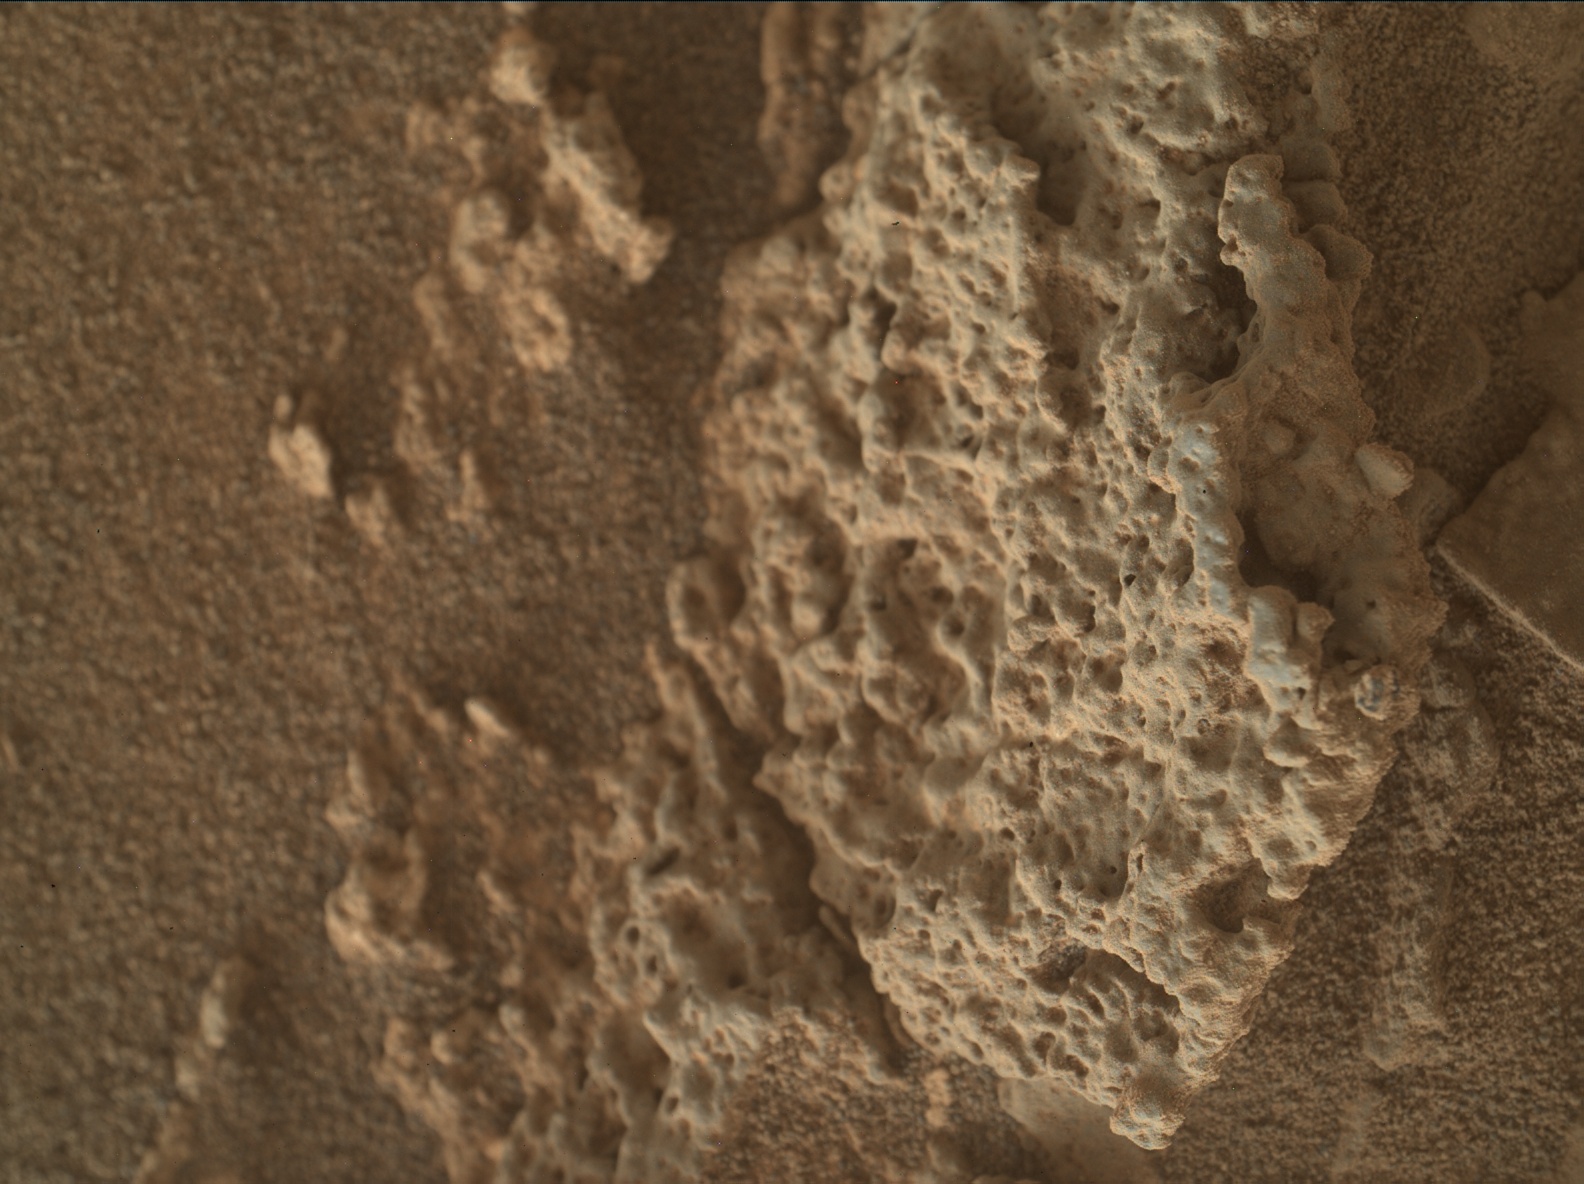 Nasa's Mars rover Curiosity acquired this image using its Mars Hand Lens Imager (MAHLI) on Sol 2642